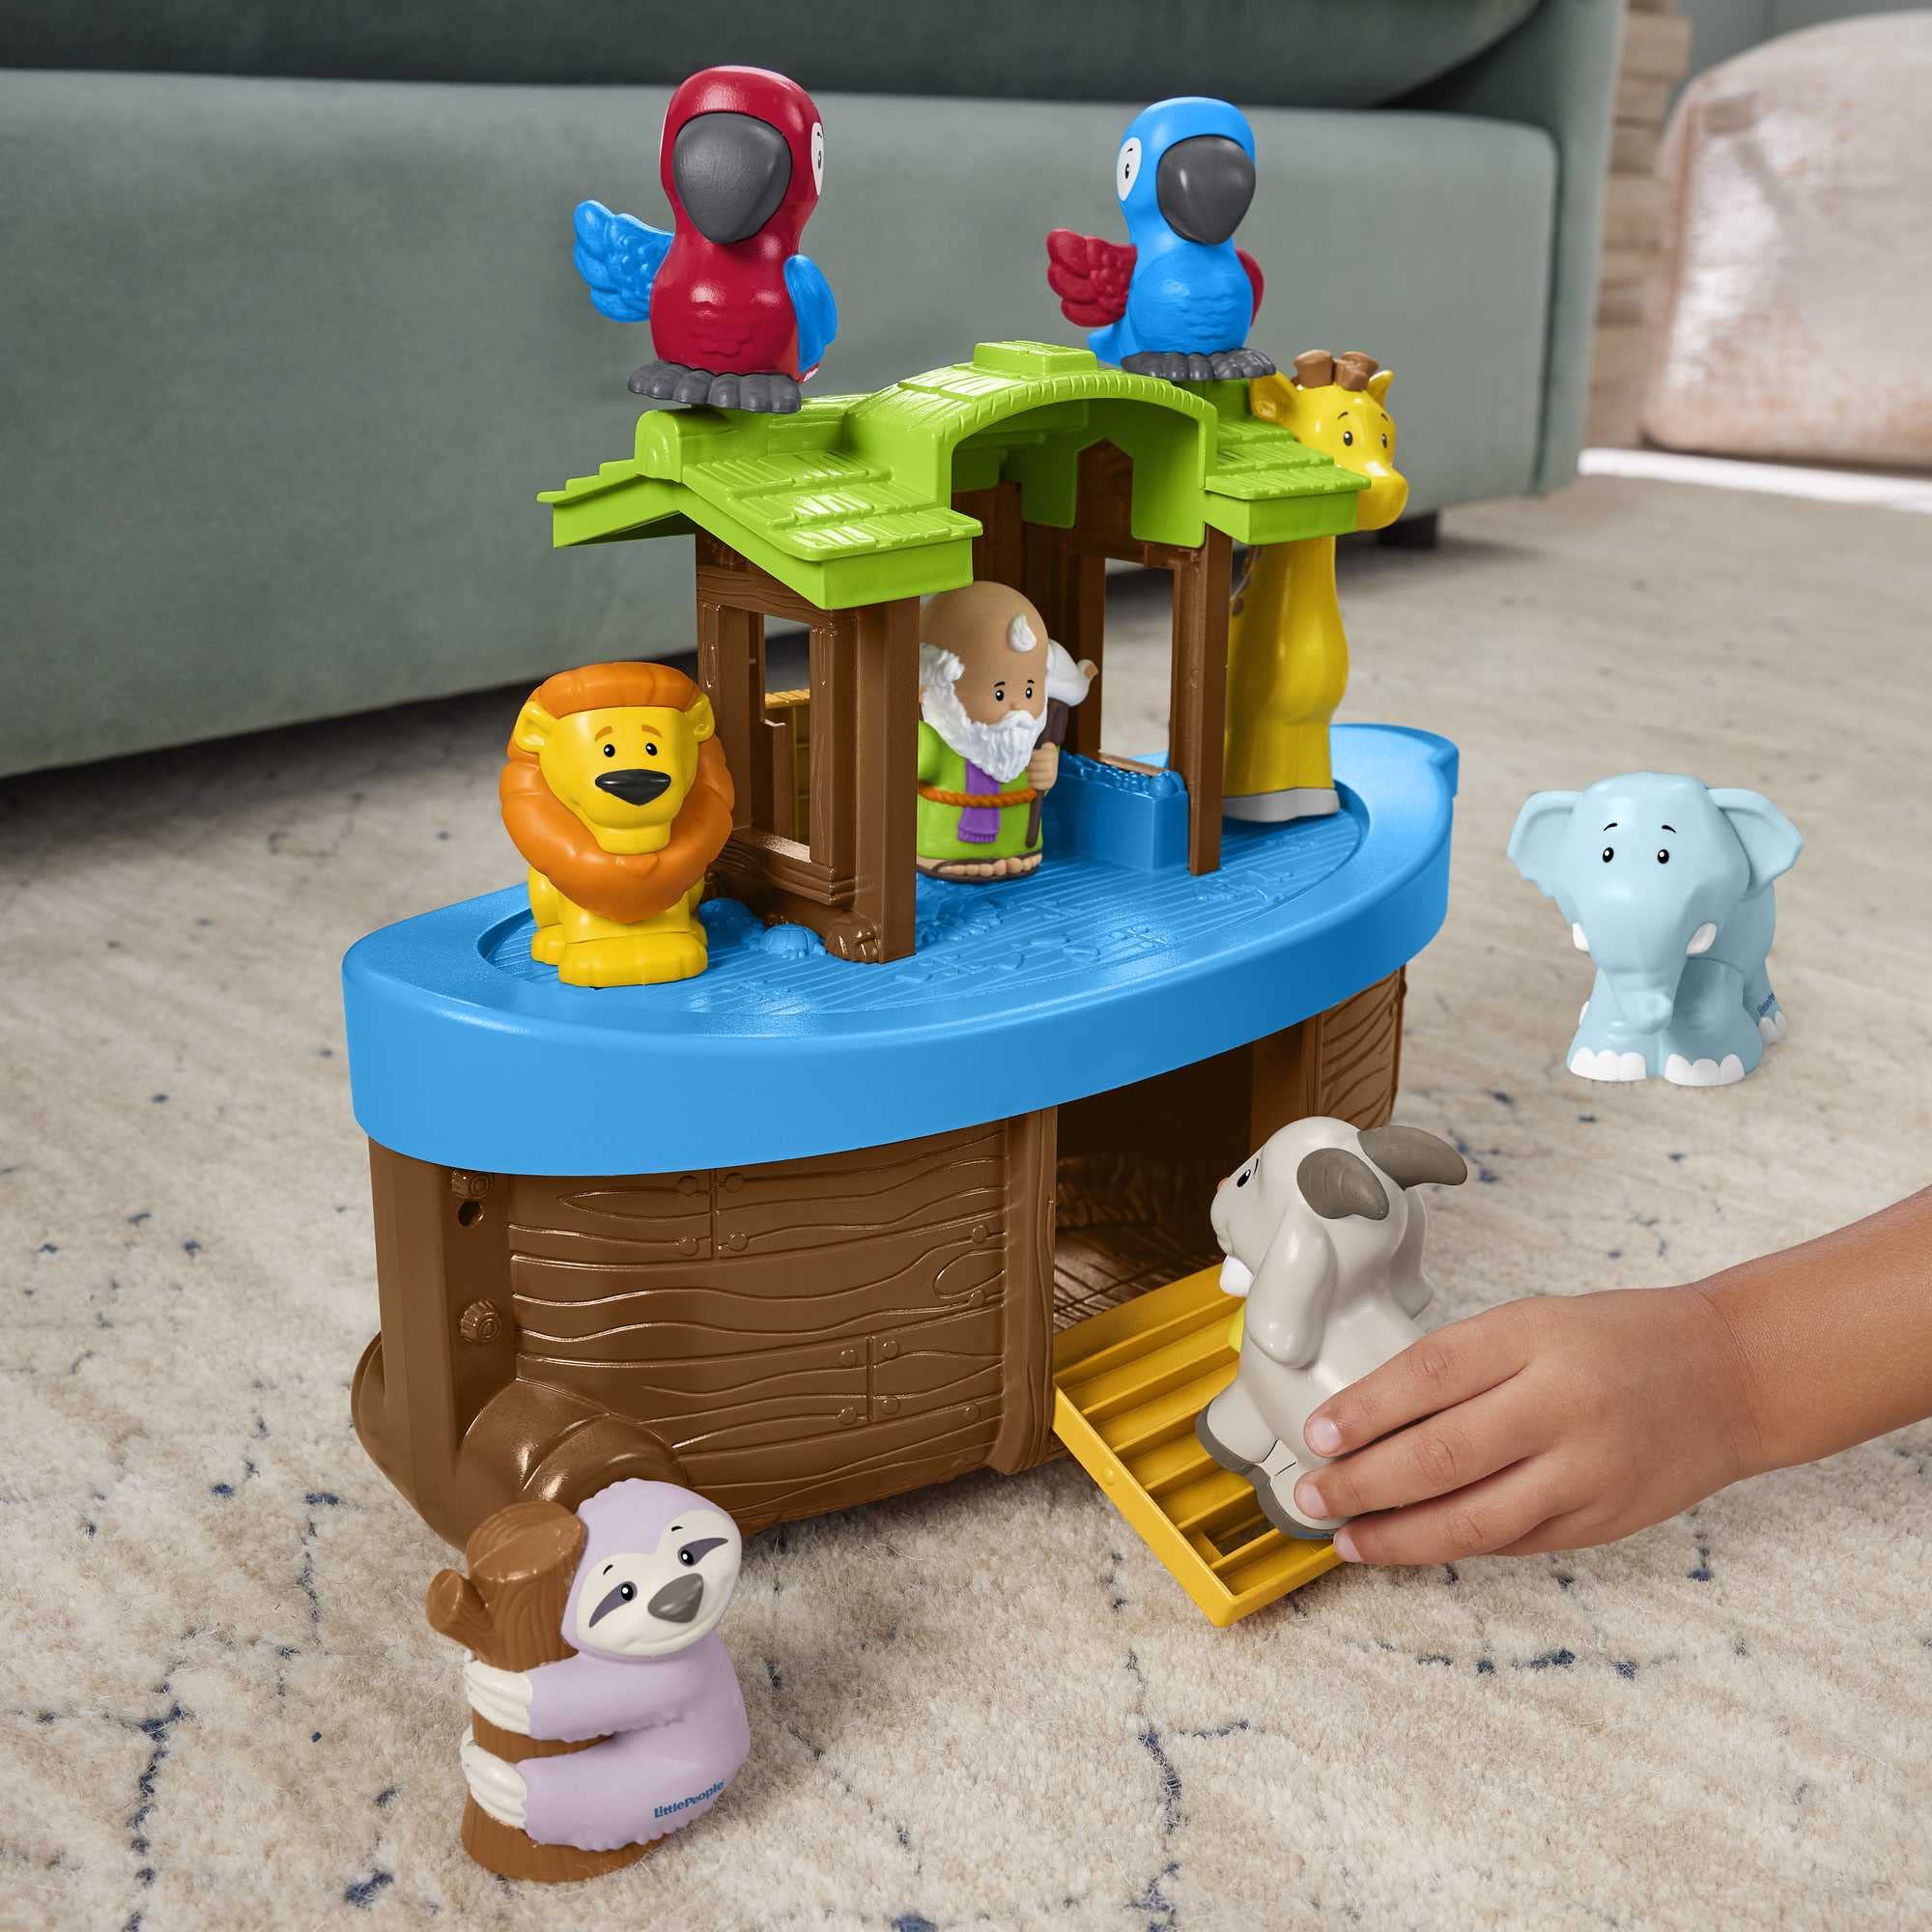 Fisher-Price Little People Toddler Toy Noah’s Ark Playset with 12 Animals and Noah Figure, Baptism Gift for Ages 1+ Years (Amazon Exclusive)